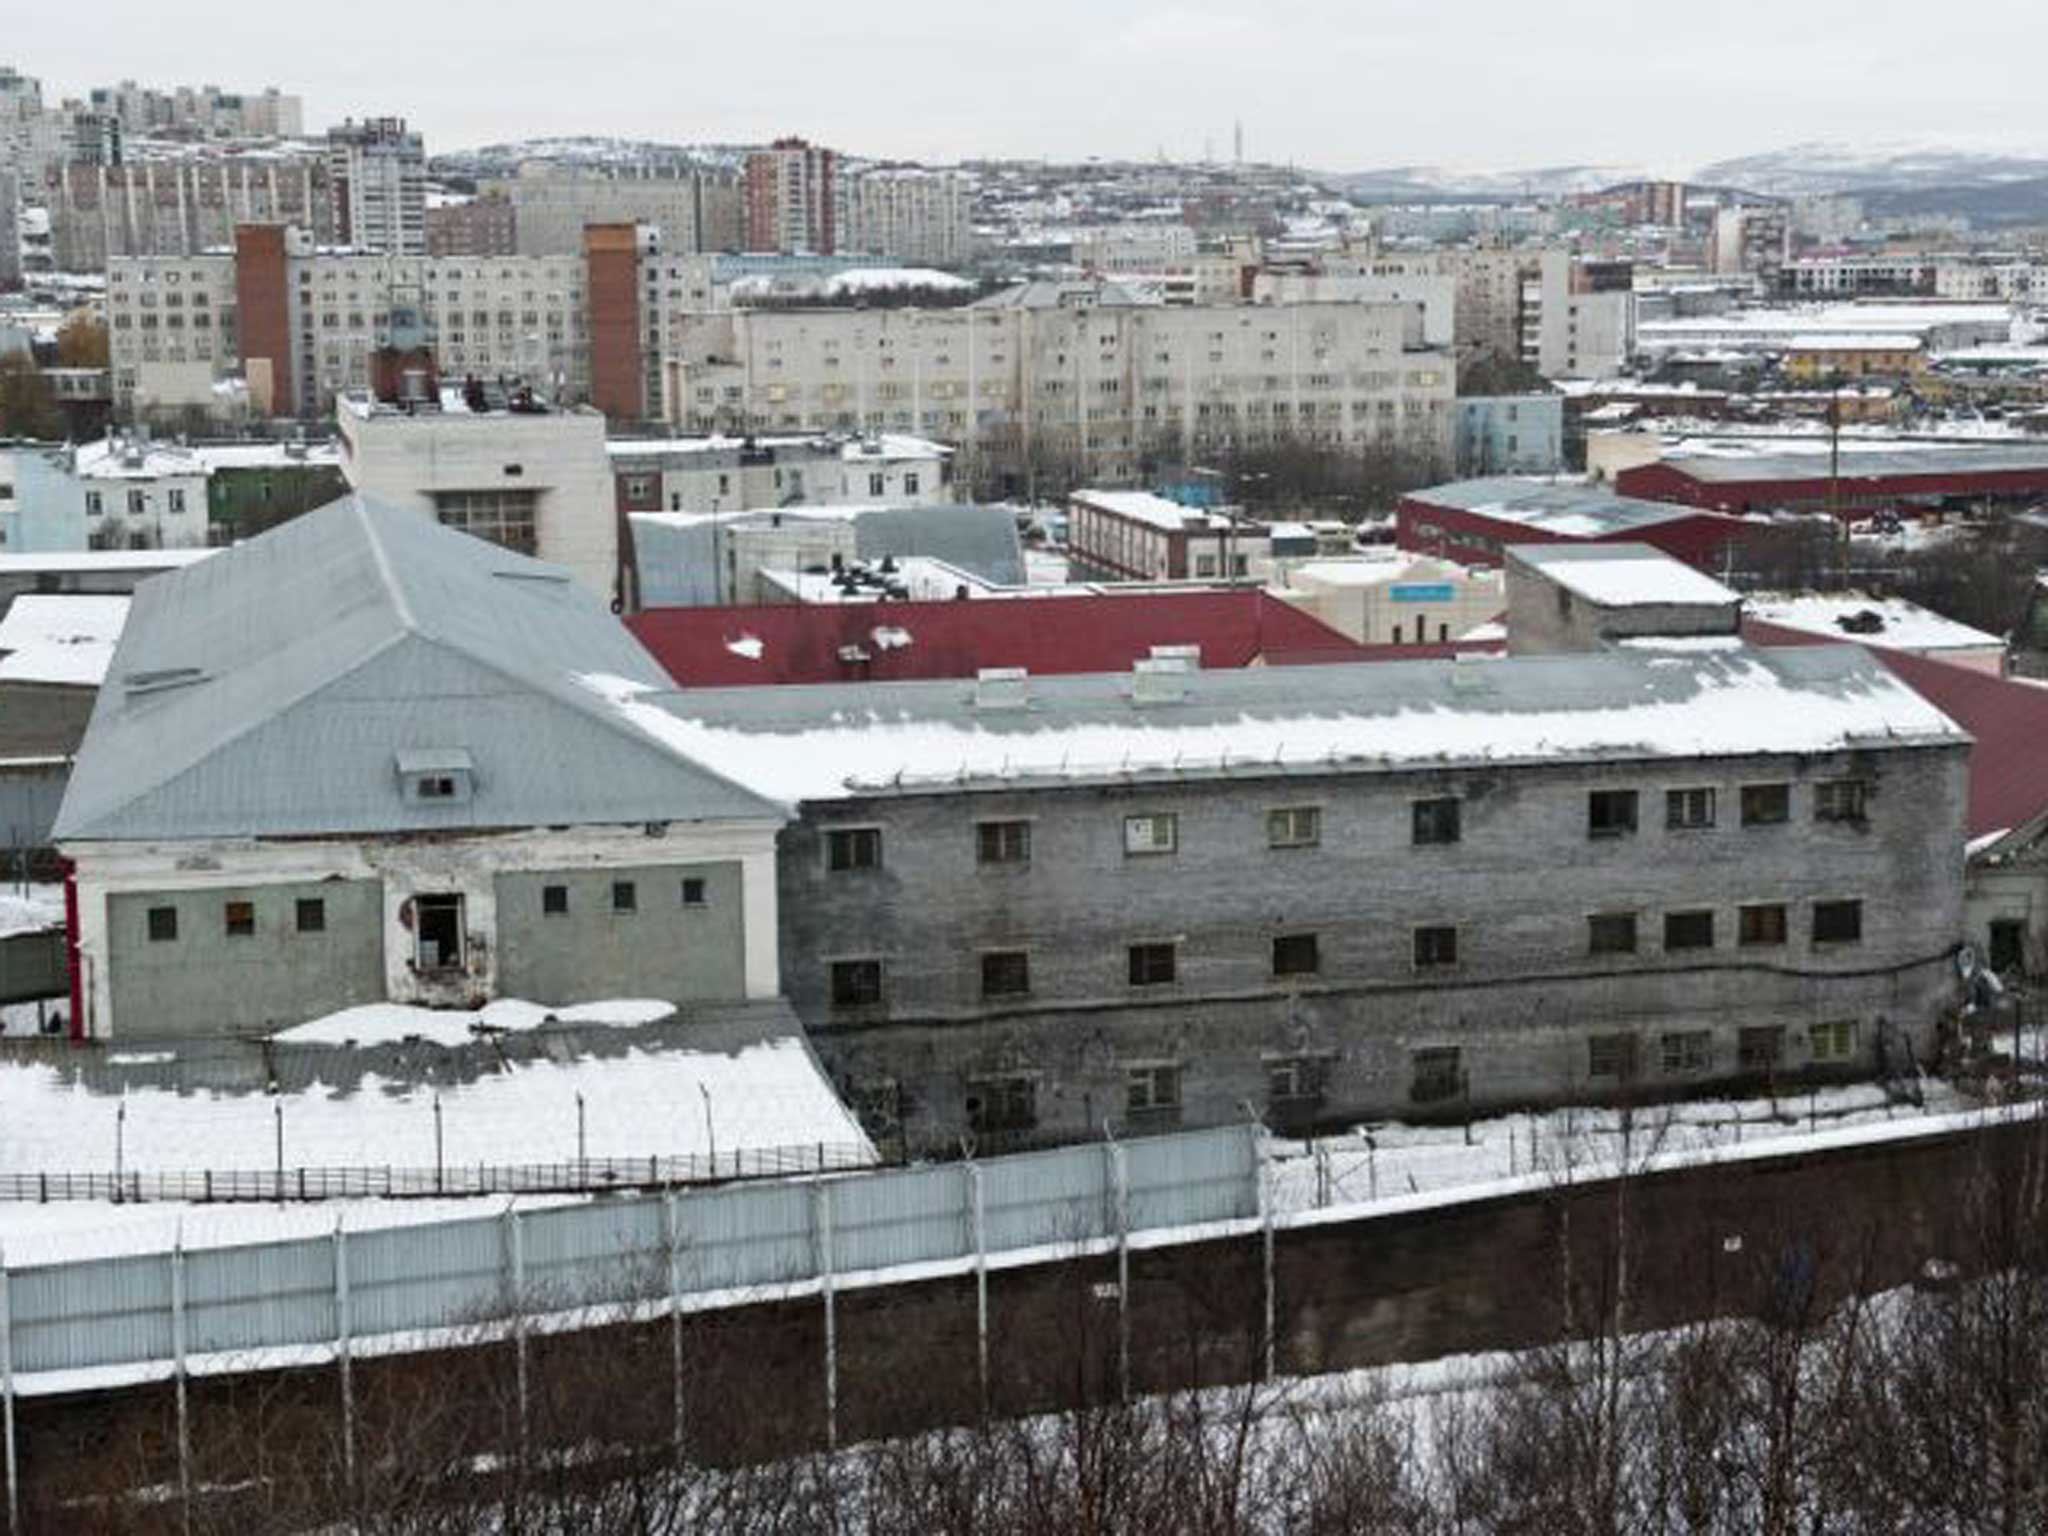 Murmansk Detention Centre where twenty-eight Greenpeace activists, a freelance photojournalist, and a film maker, are being held.